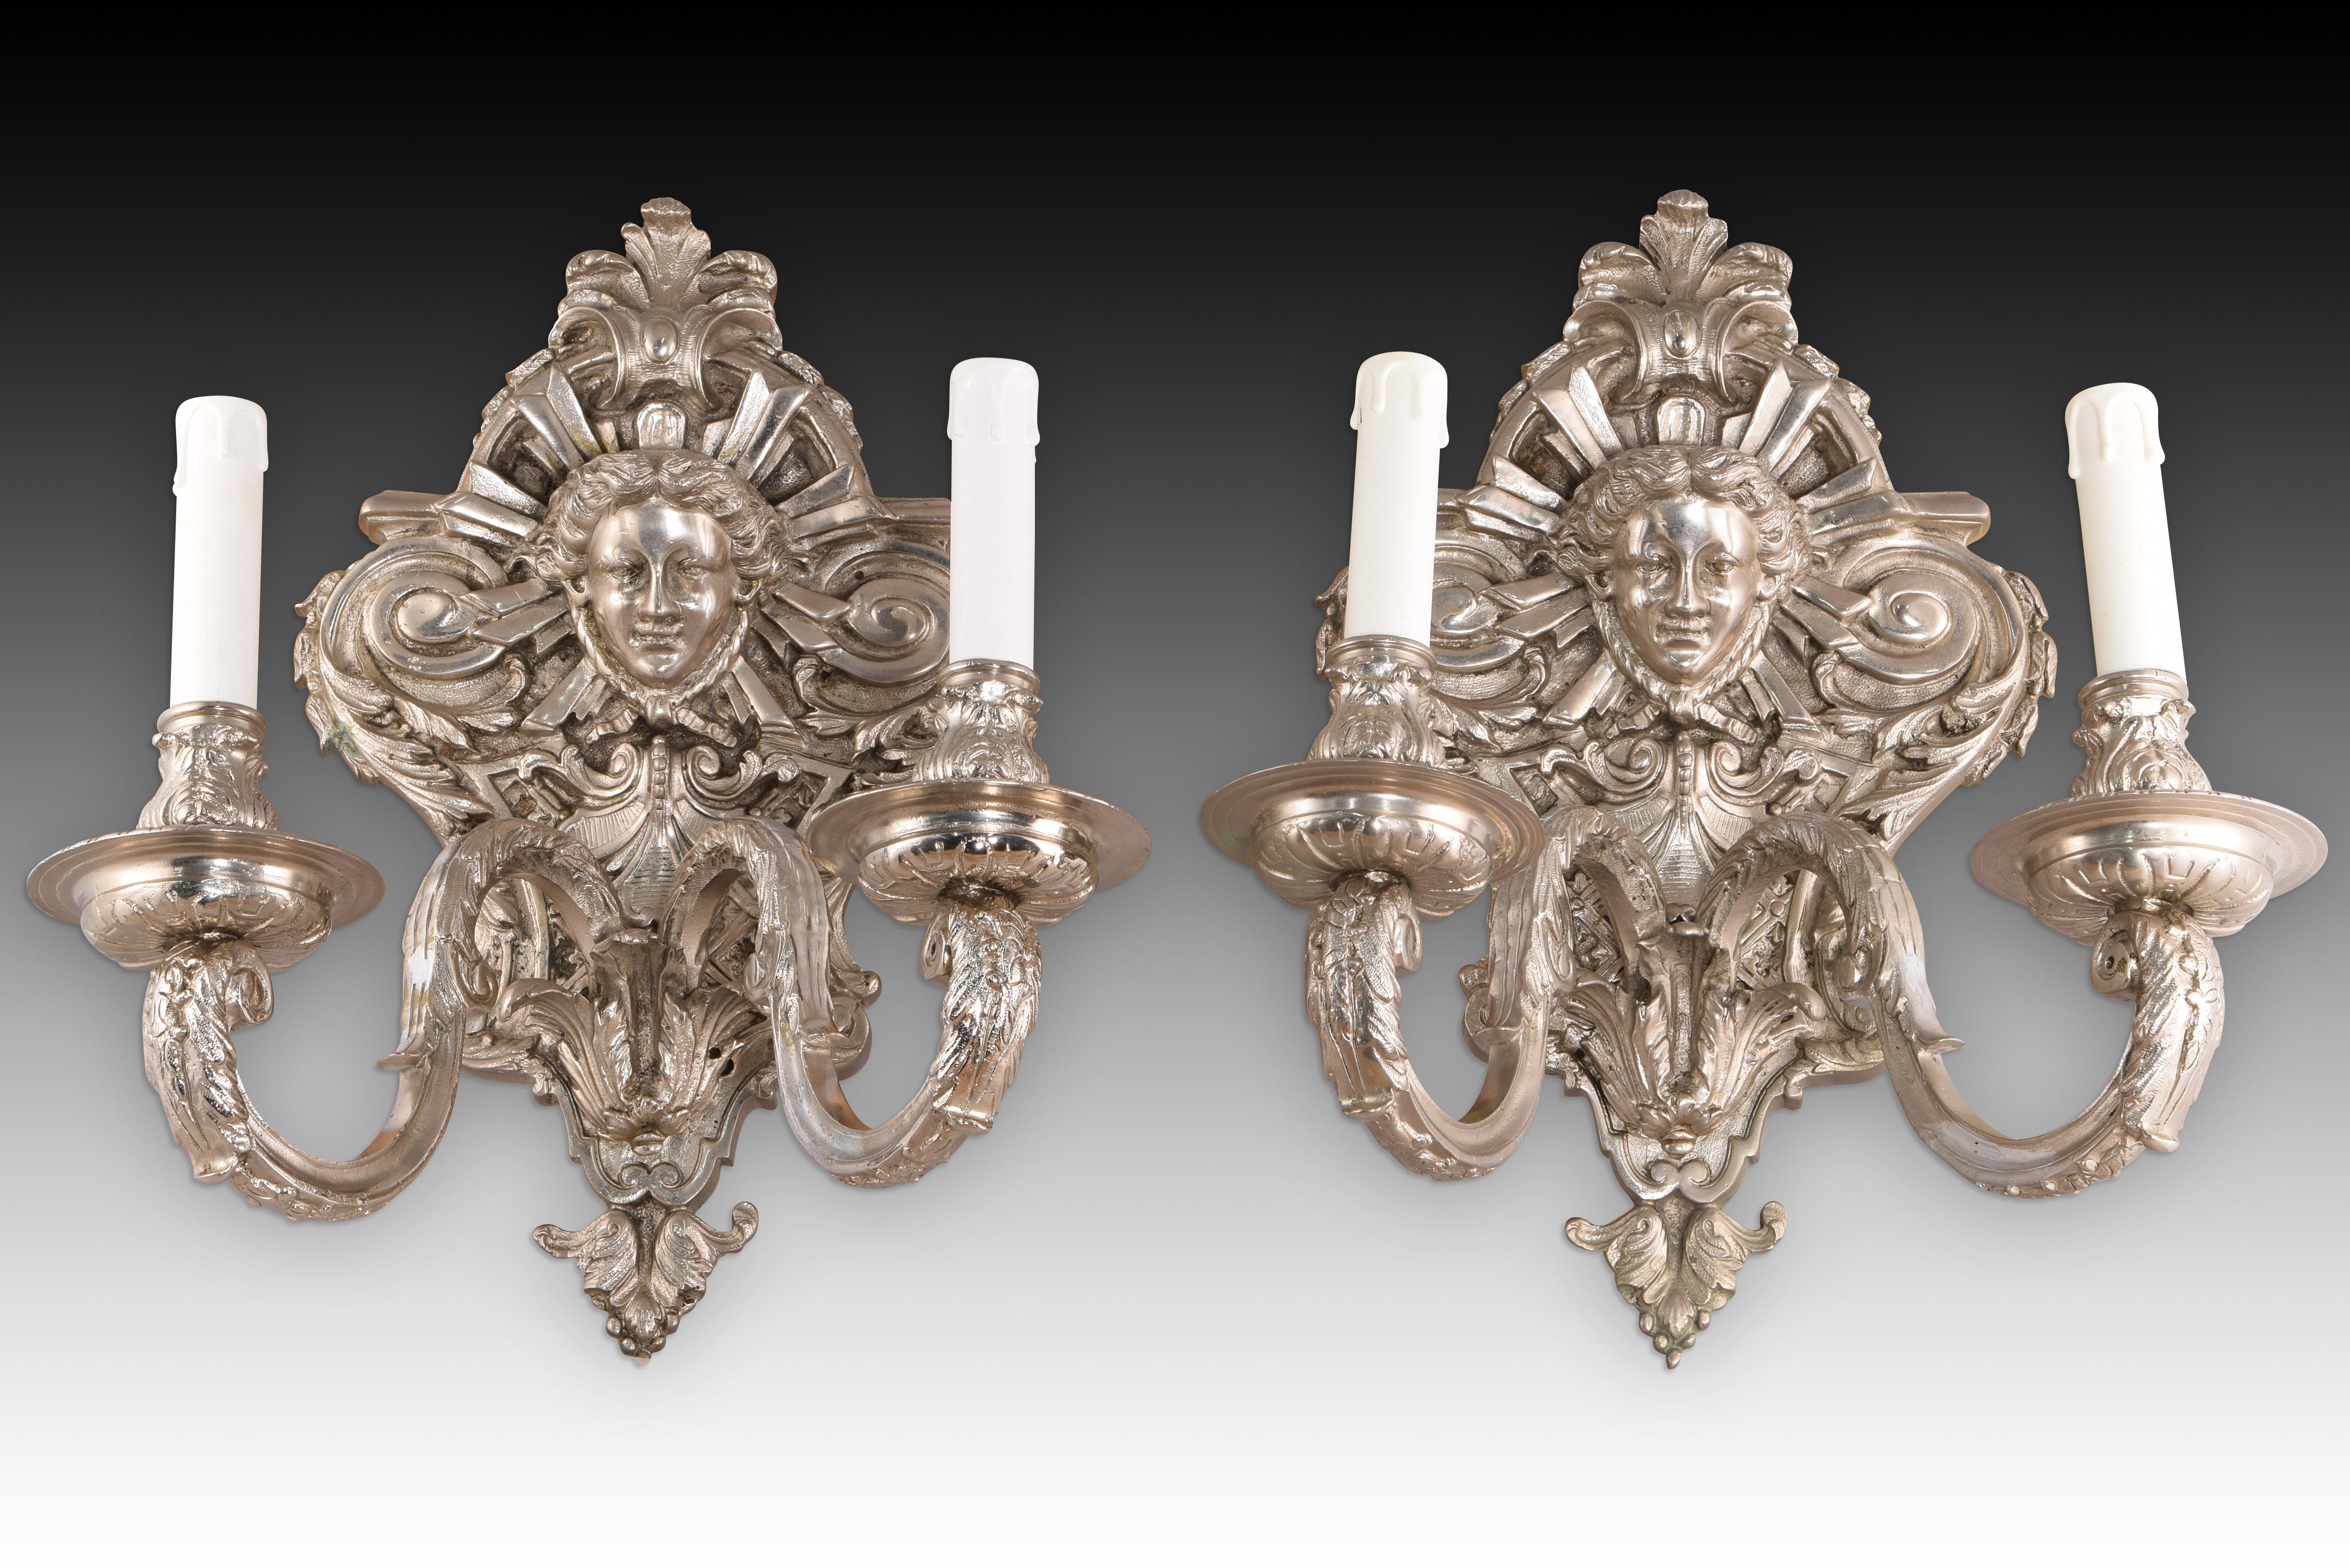 Pair of sconces. Bronze. Silver finish.
Pair of wall sconces with two lights each, decorated with figurative, vegetal and
decorated with figurative, vegetal and architecturalarchitectural elements inspired by certain 19th century Rococo
19th century